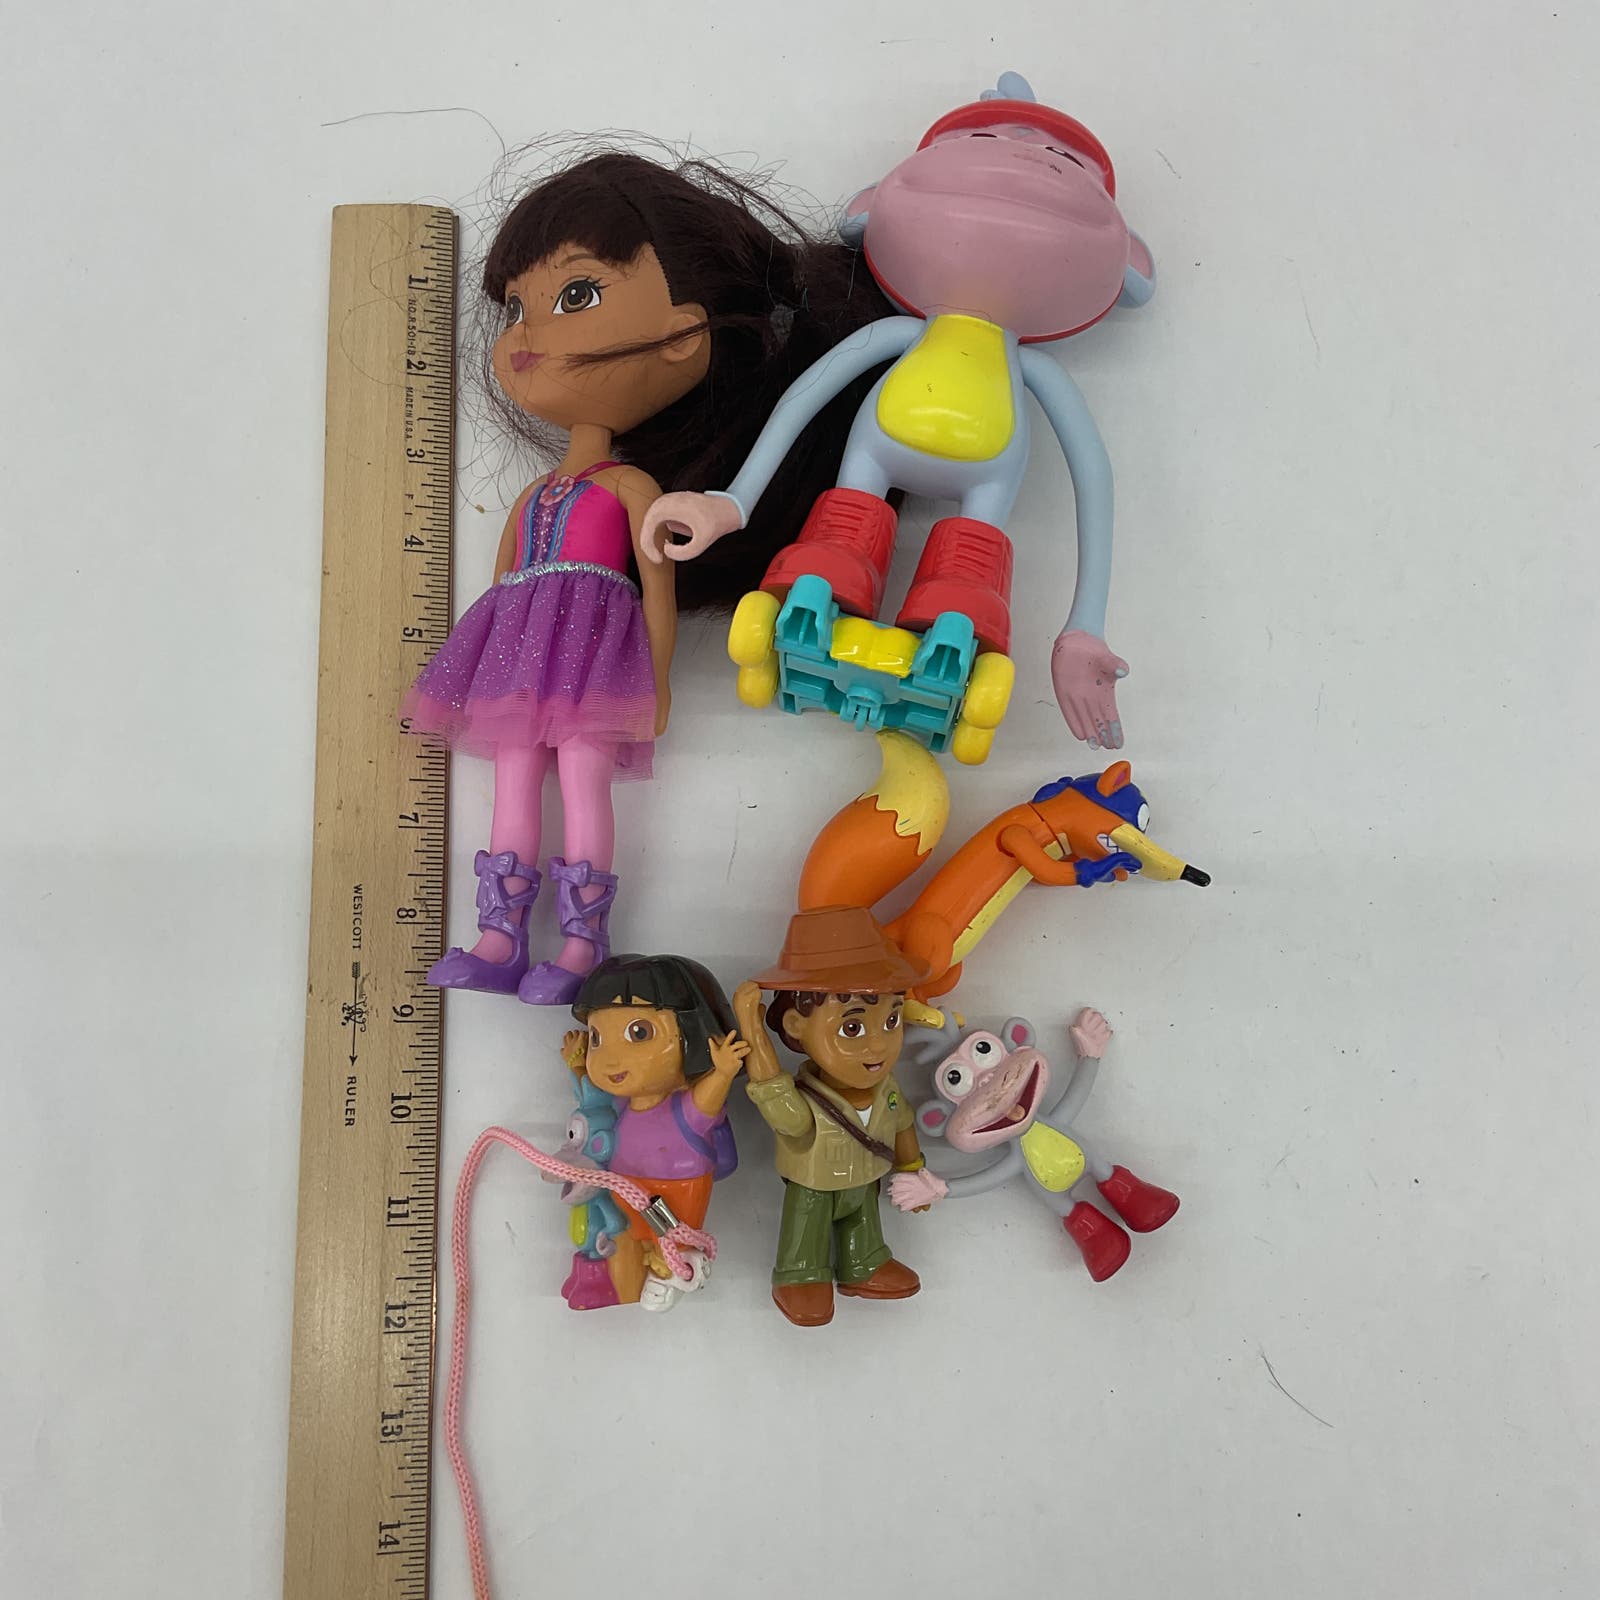 Mixed Nickelodeon LOT Dora the Explorer Toy Figures Dolls Character Cake Toppers - Warehouse Toys